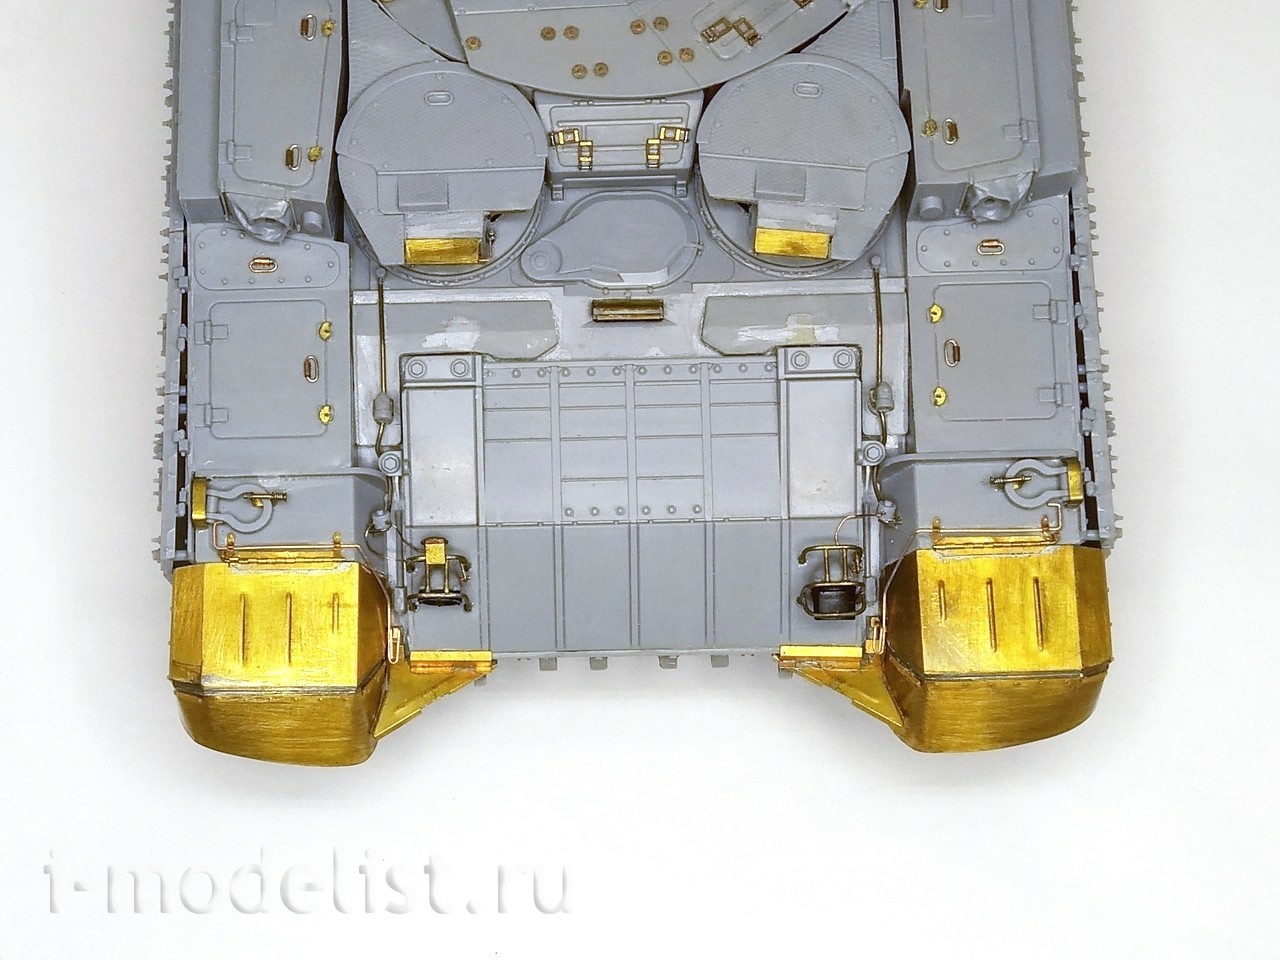 035330 Microdesign 1/35 Front mud flaps T-90MS/BMPT/MSTA